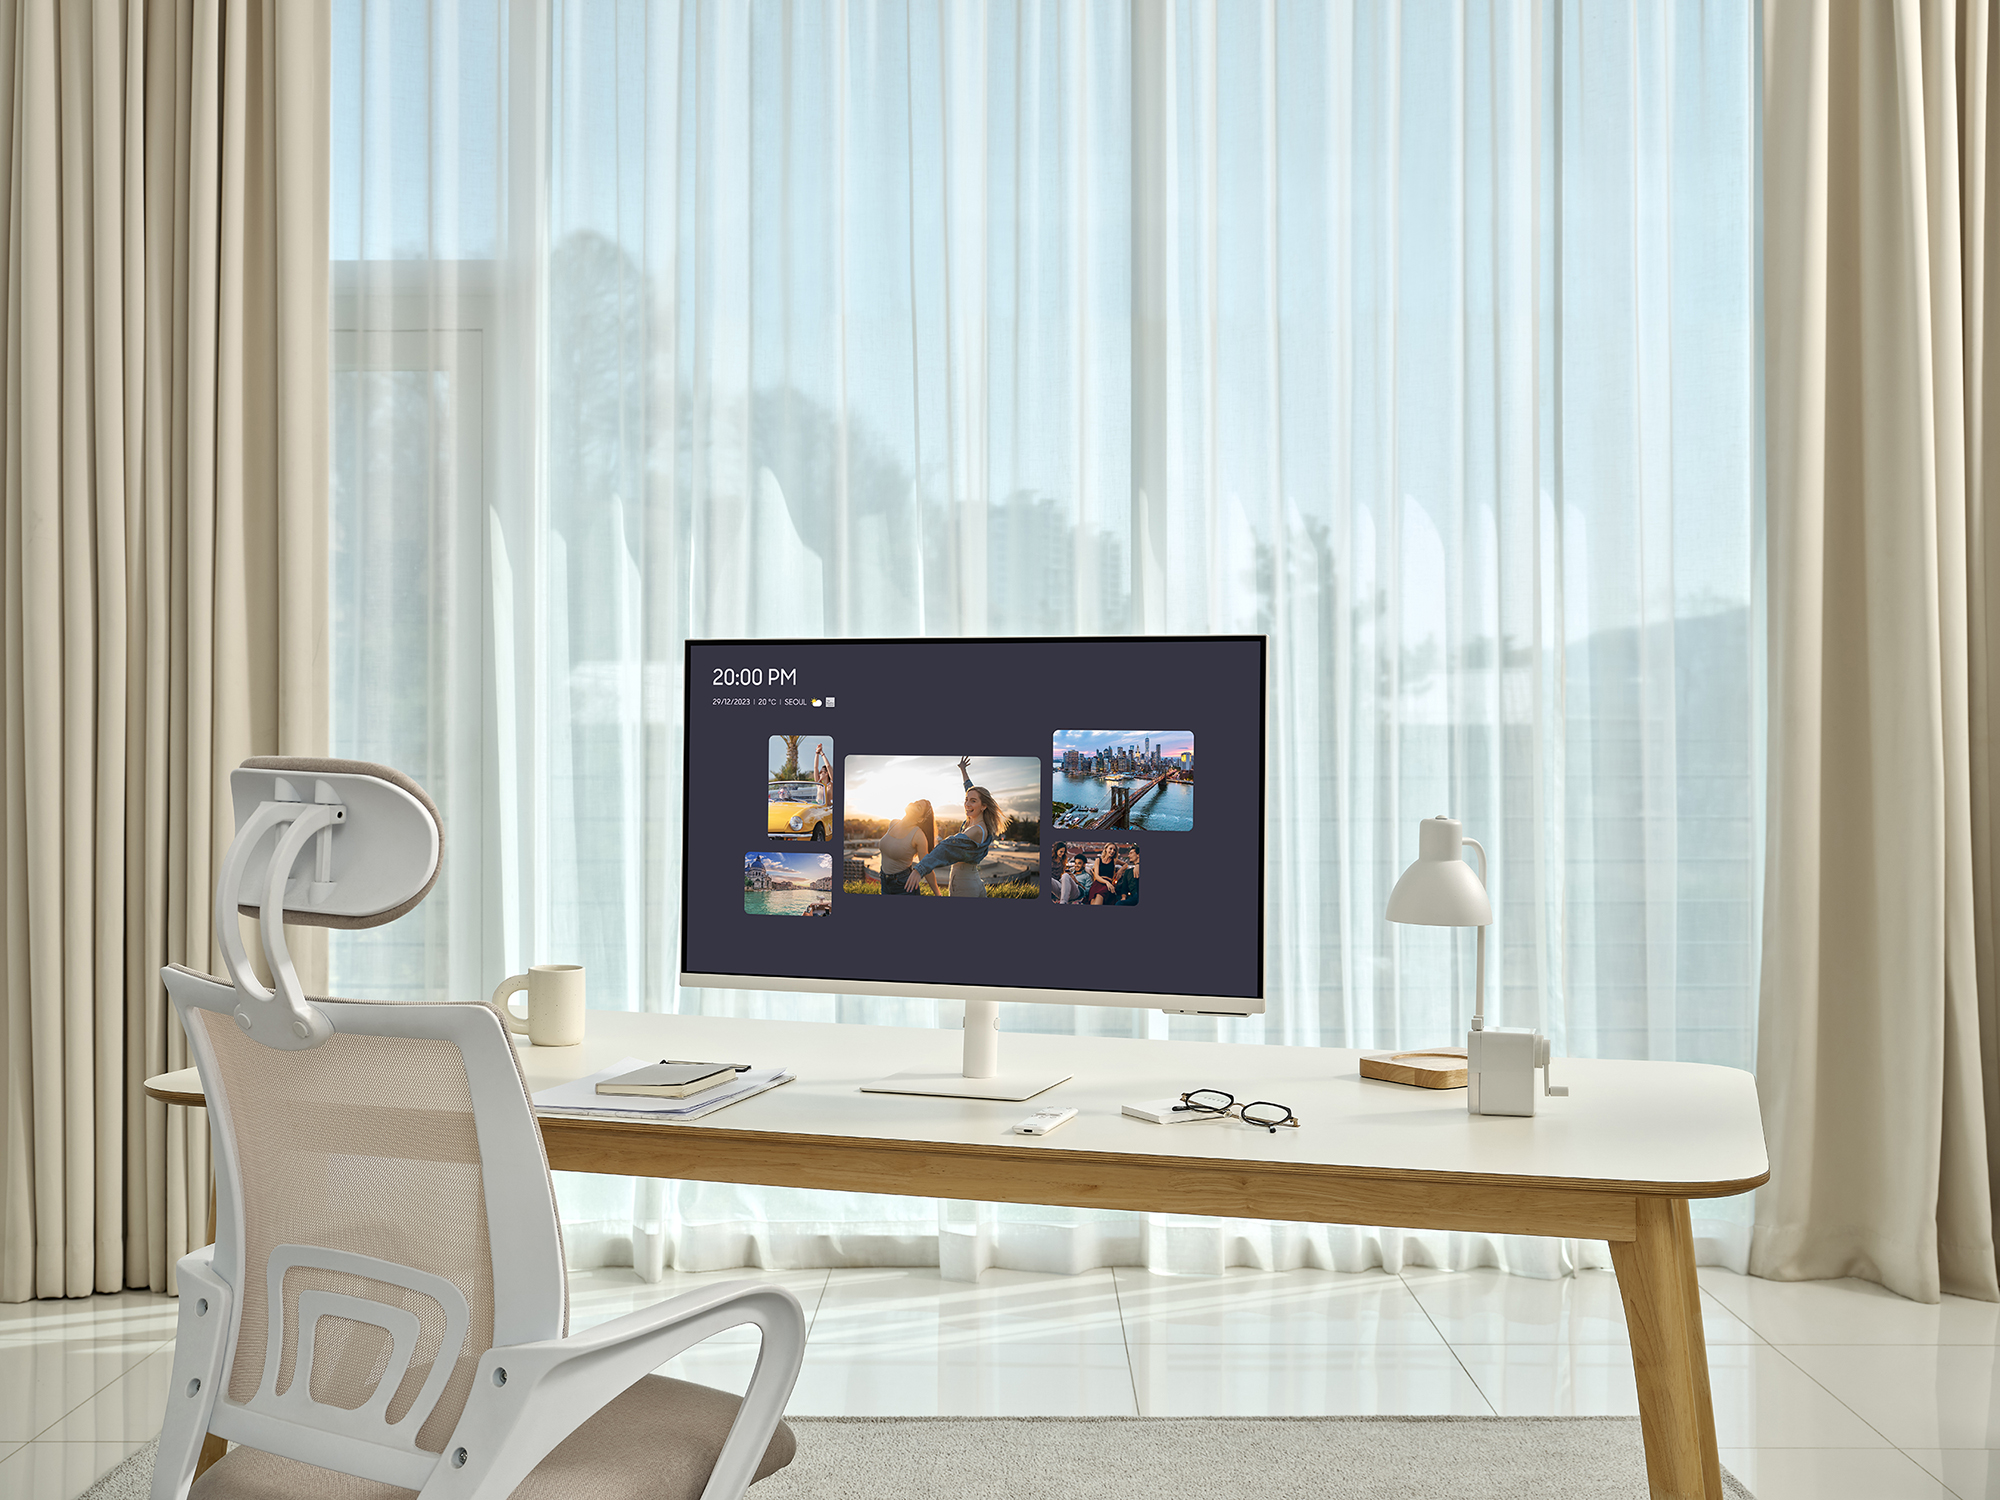 Samsung launches M8, M7 and M5 Smart Monitors (2)